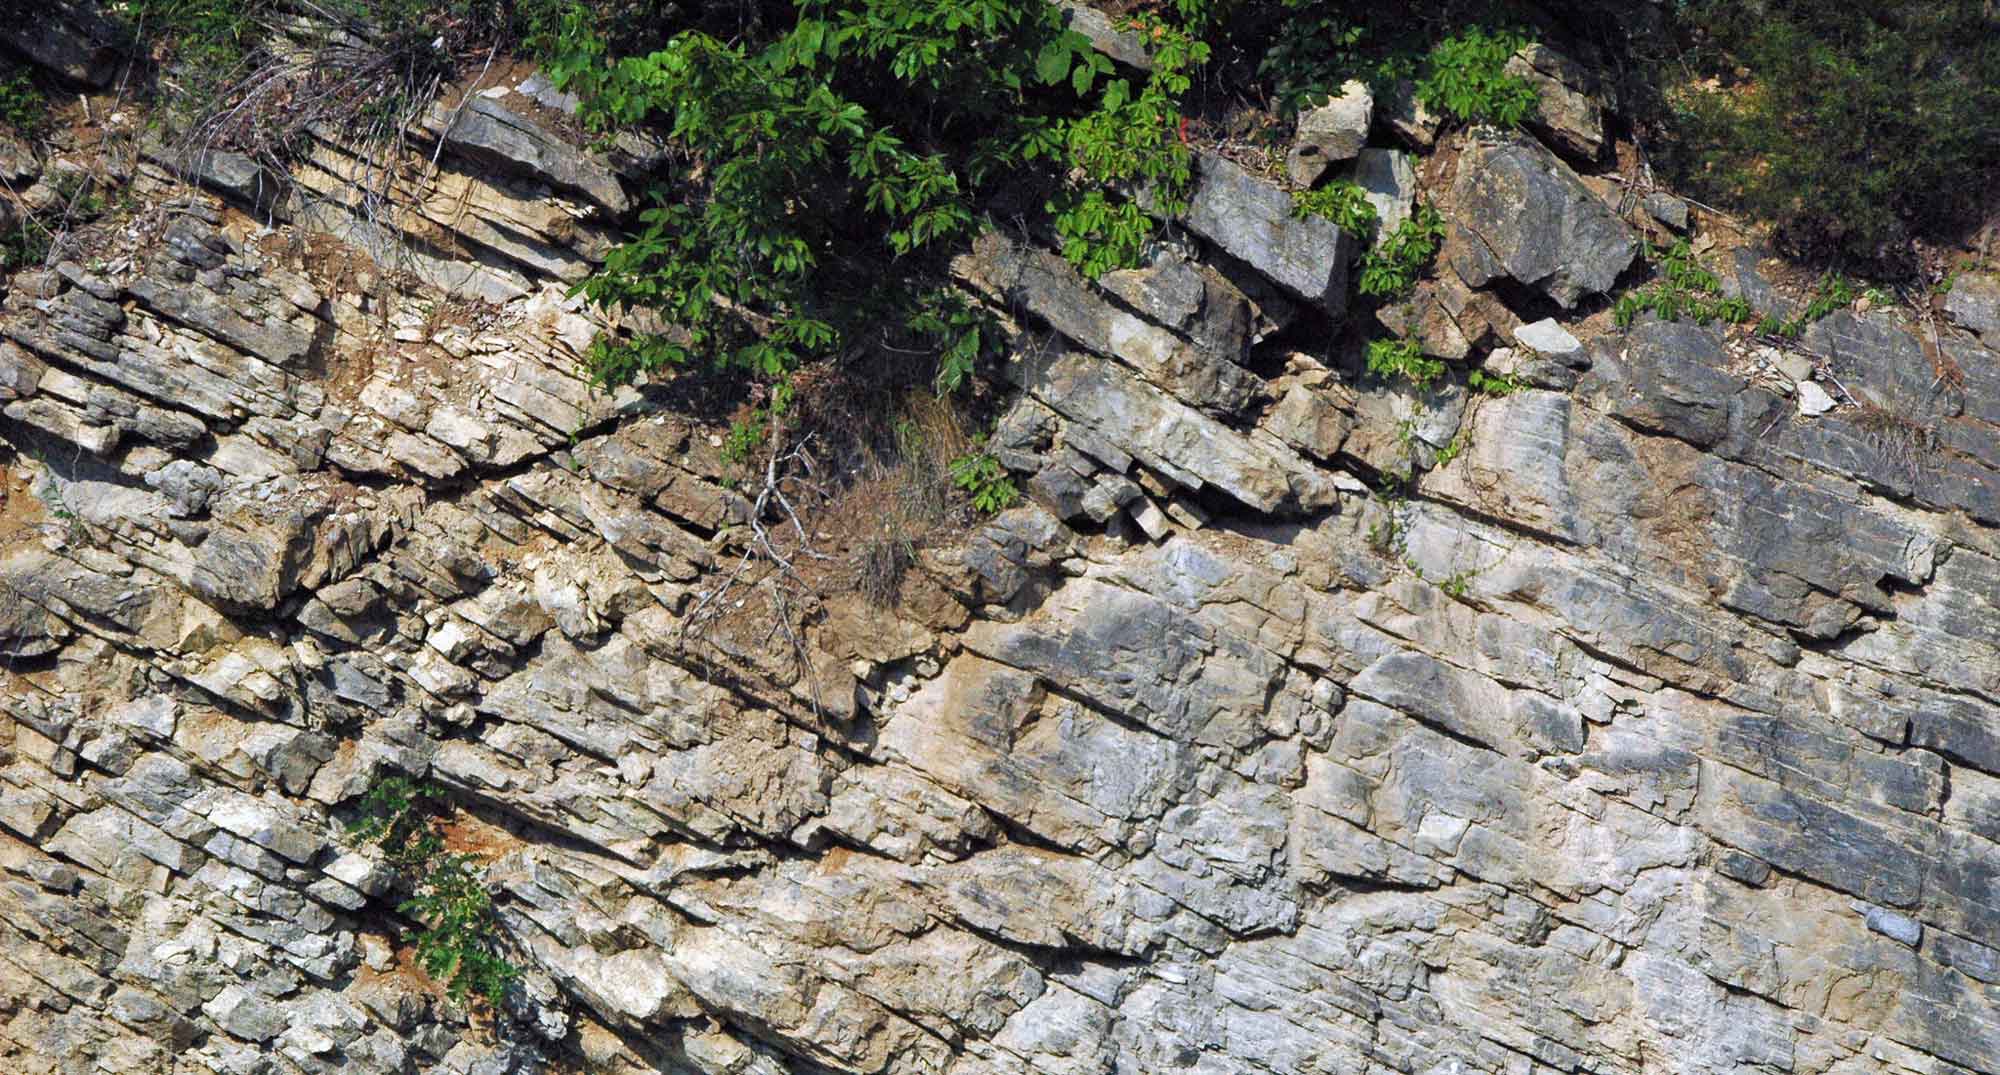 Photograph of Ordovician limestone layers from Tennessee.